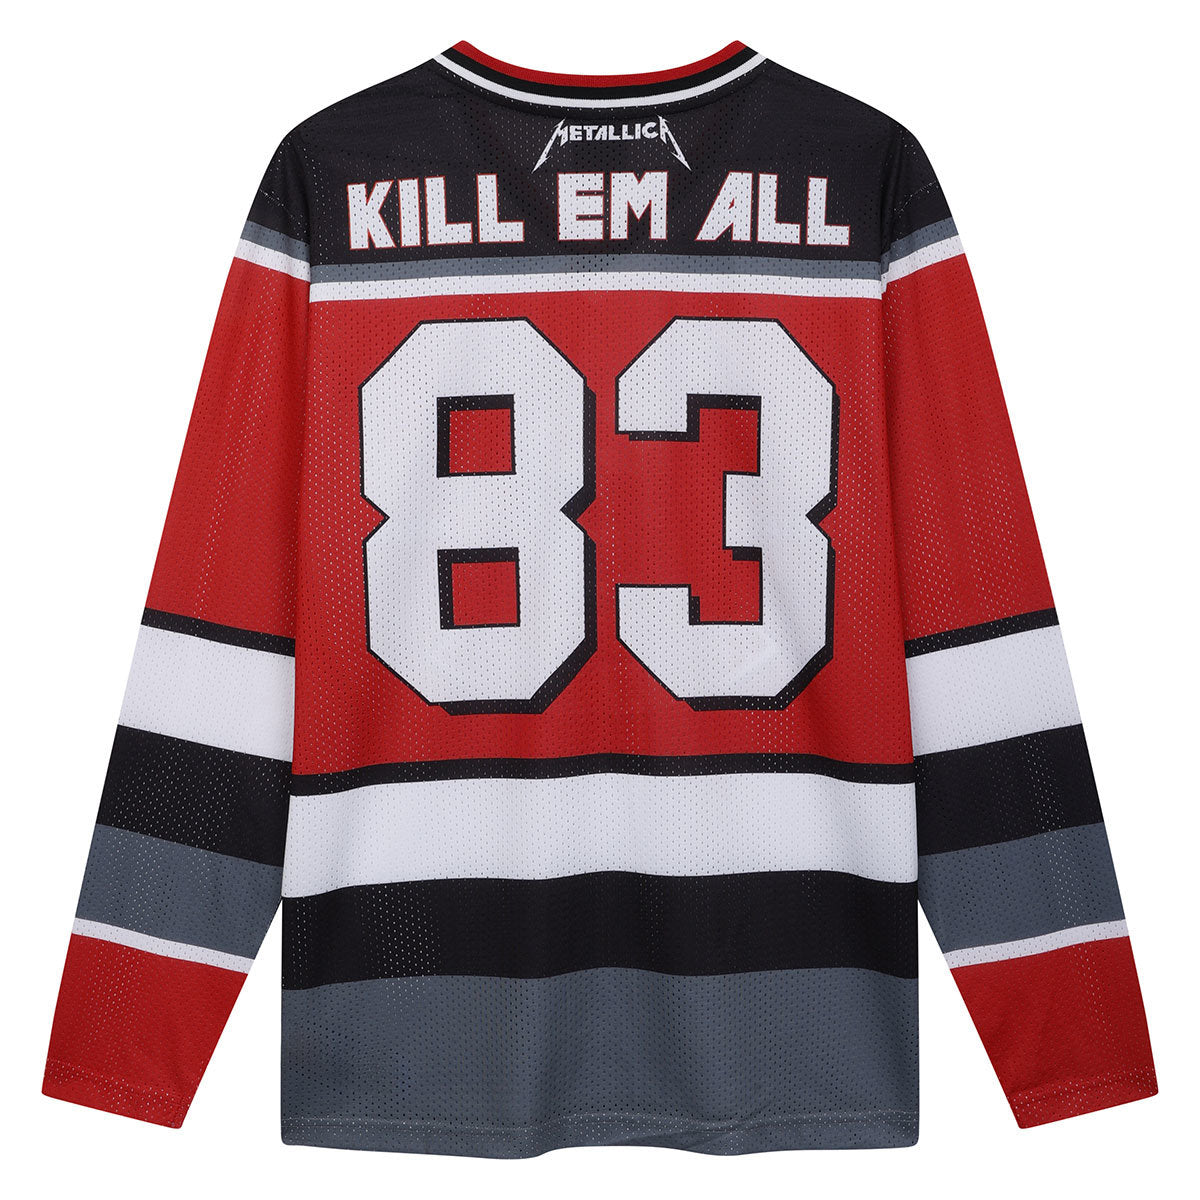 Amplified Metallica Hockey Jersey - Official Licensed Product